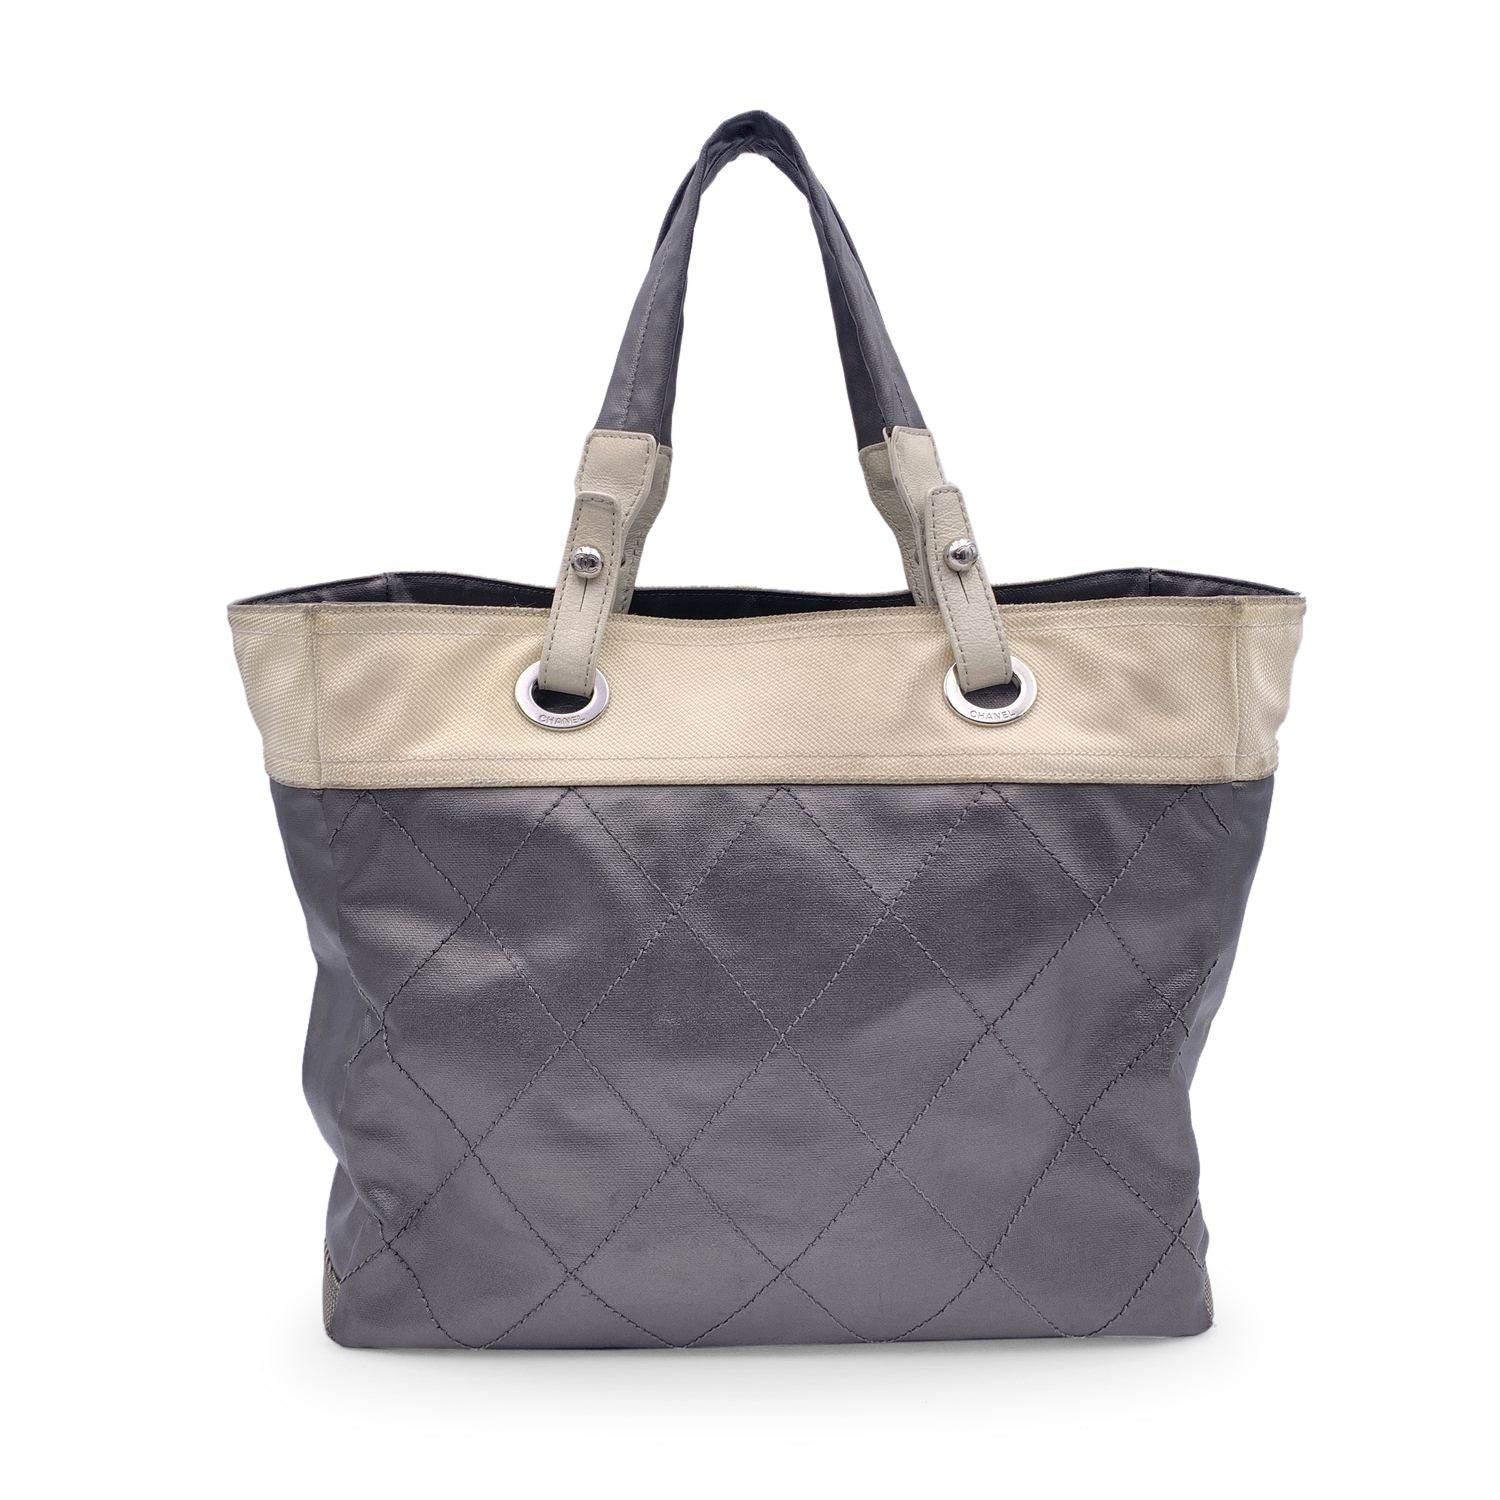 Chanel Gray Metallic Quilted Canvas Paris Biarritz Tote Bag In Good Condition For Sale In Rome, Rome